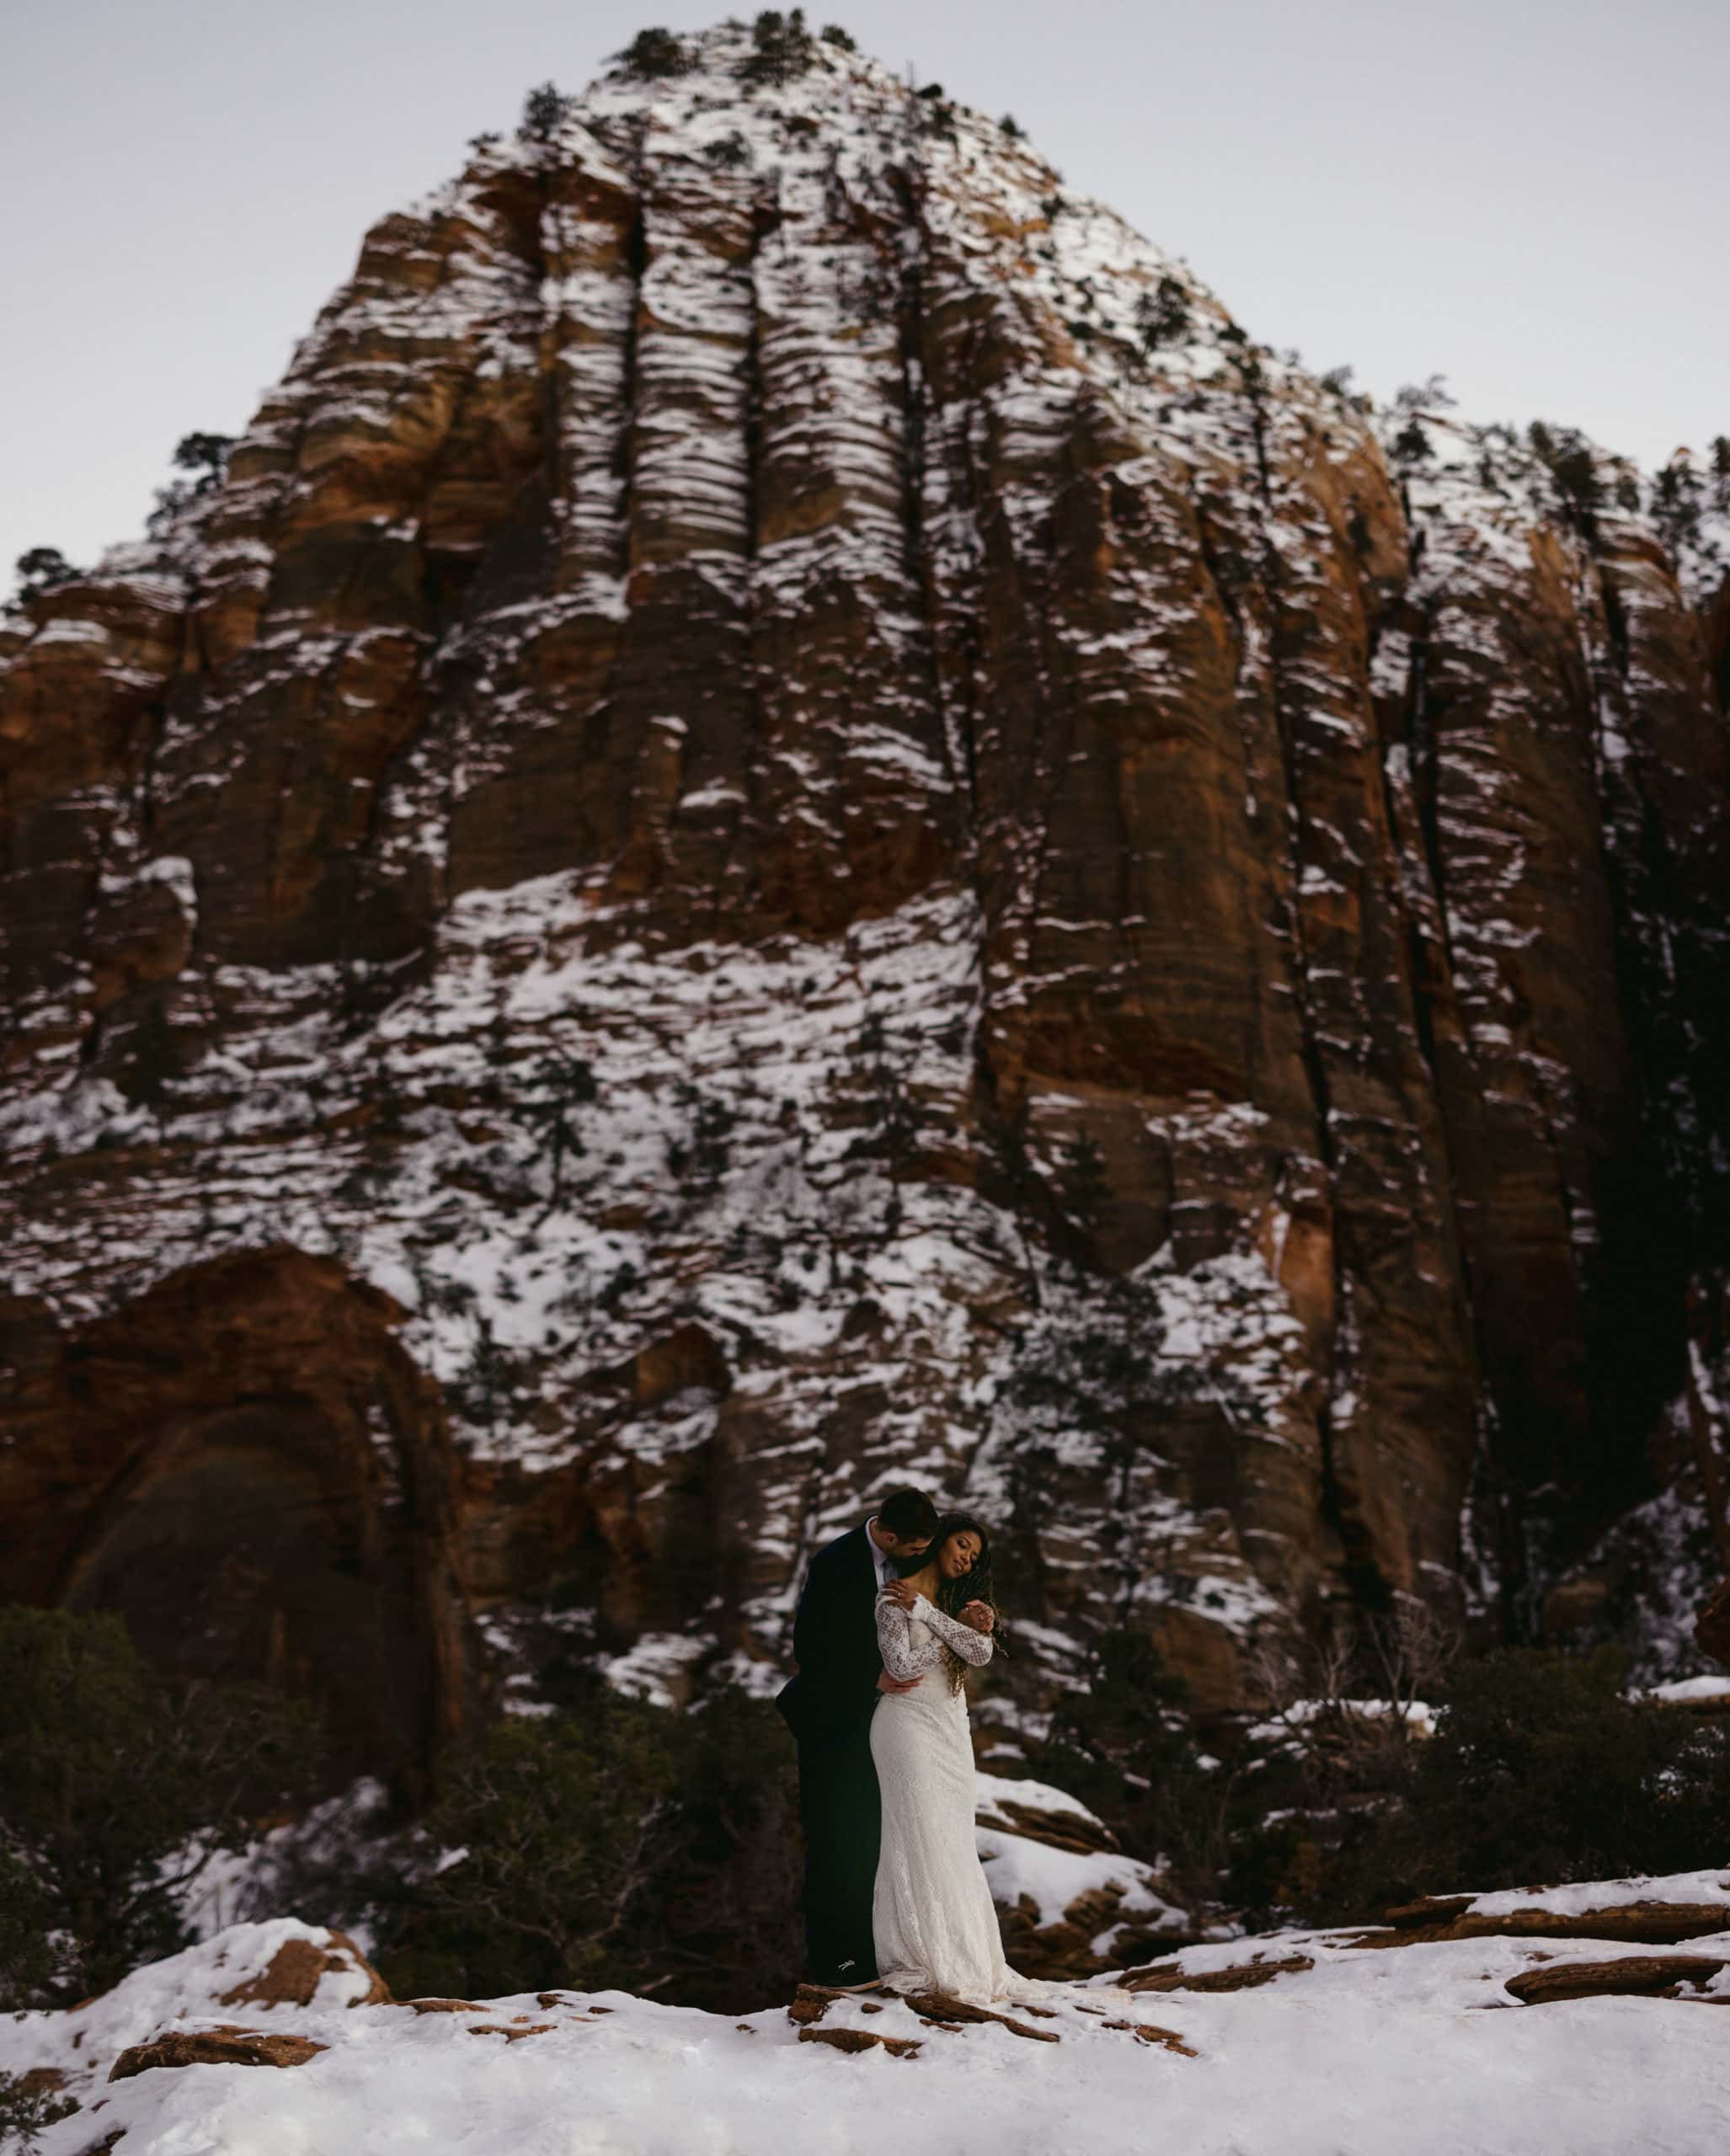 A zion national park elopement at Observation point in the winter.